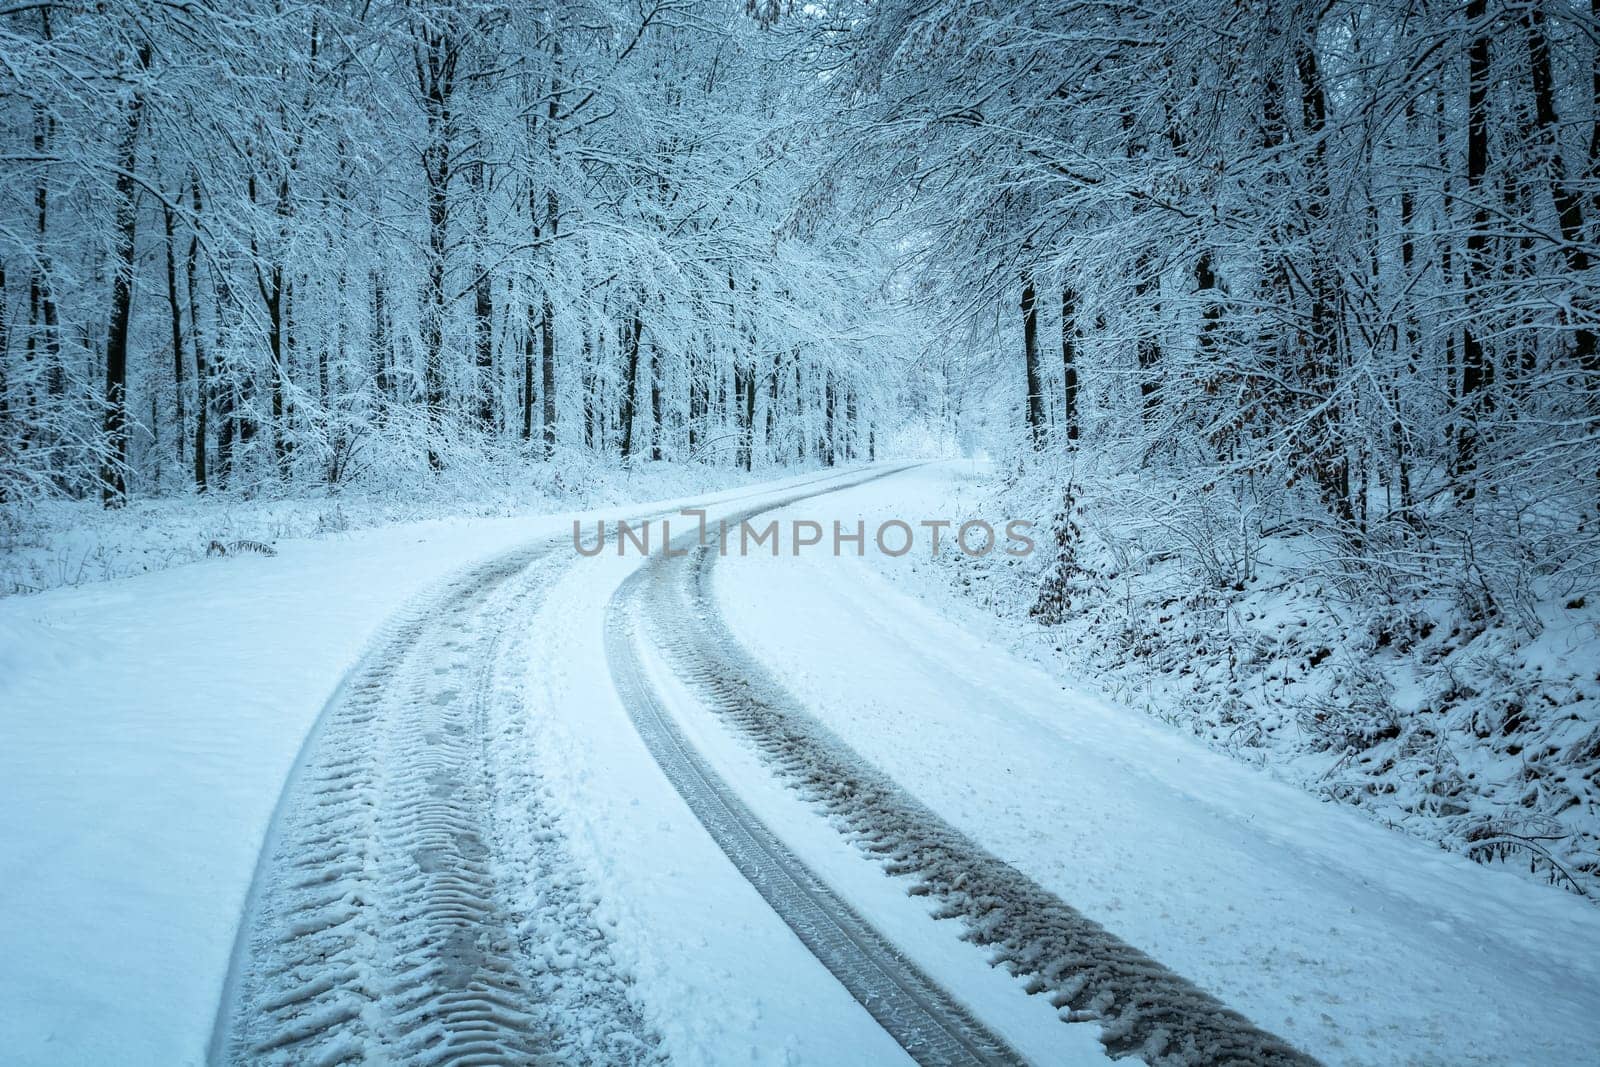 Wheel tracks on a snow-covered road in the forest by darekb22